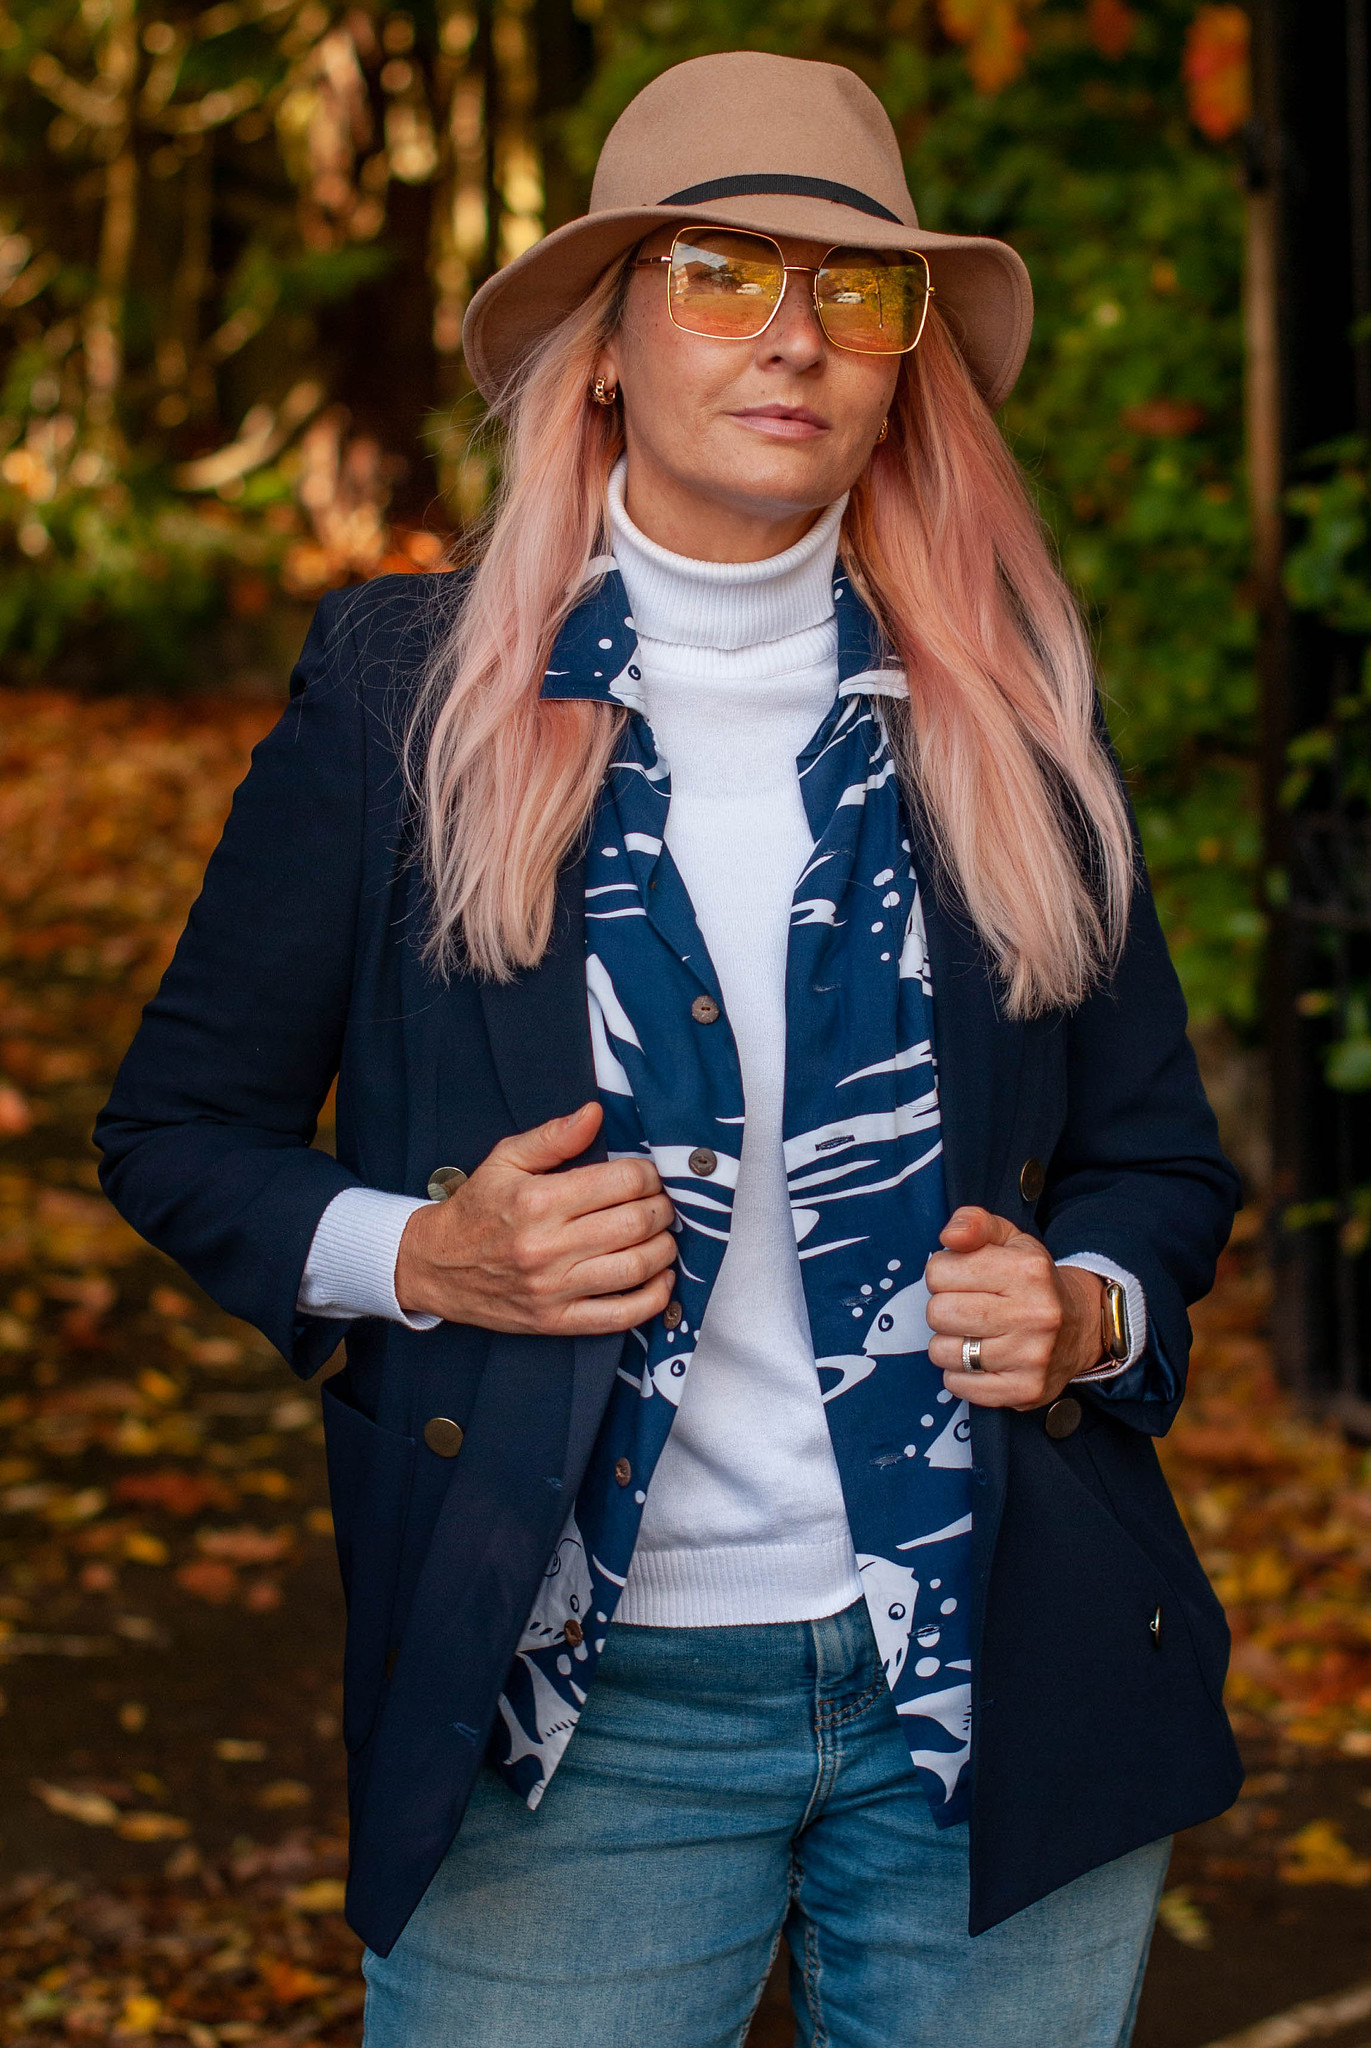 Borrowed From the Boys: Shirts For Him That You Can Wear | A Ralph Lauren patterned shirt with white roll neck, boyfriend jeans and navy blazer (over 50 fashion from Catherine Summers AKA Not Dressed As Lamb)